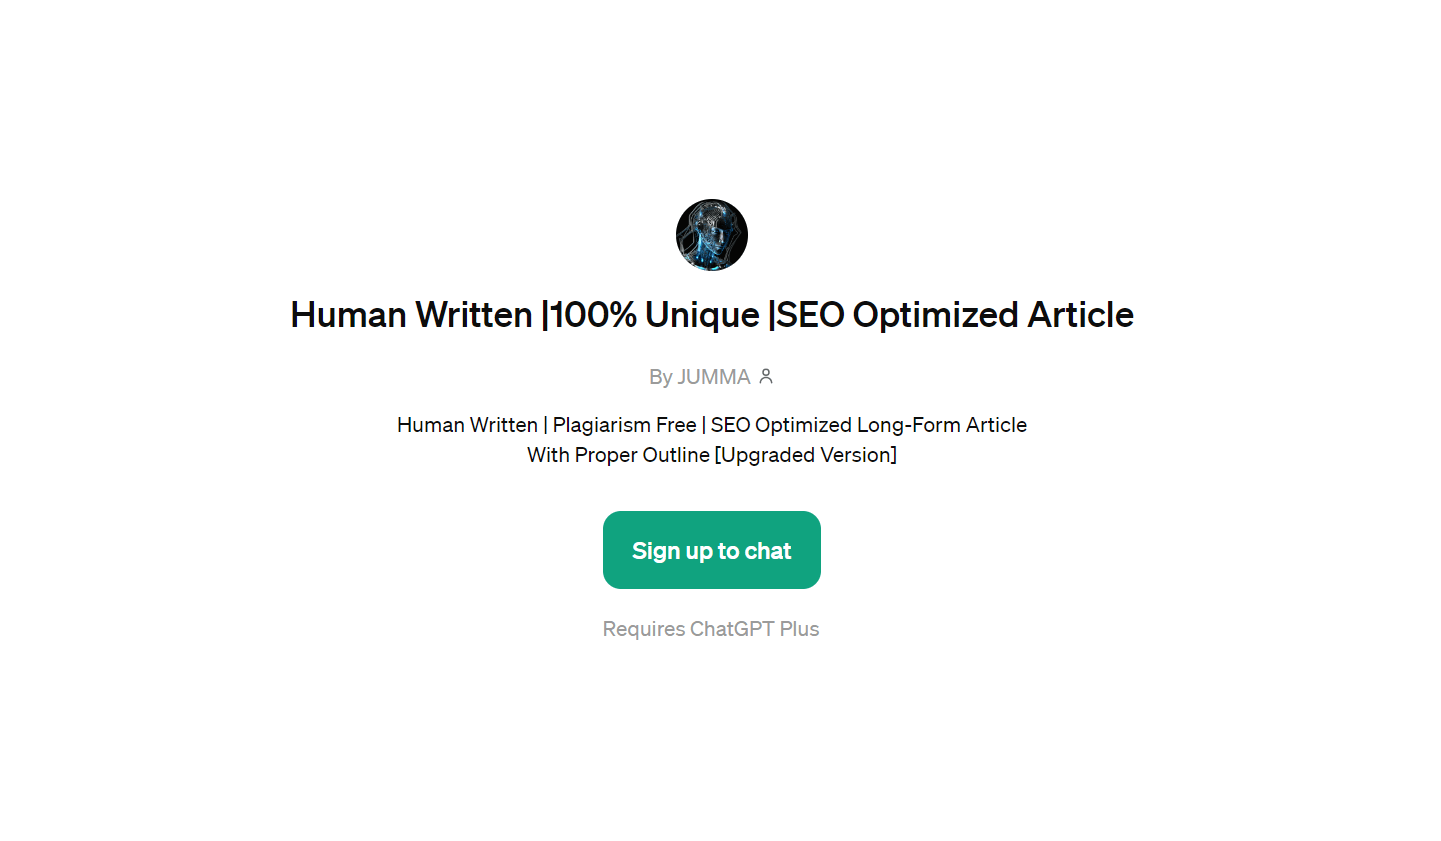 Human Written |100% Unique |SEO Optimized Article - Boost Your Content Creation